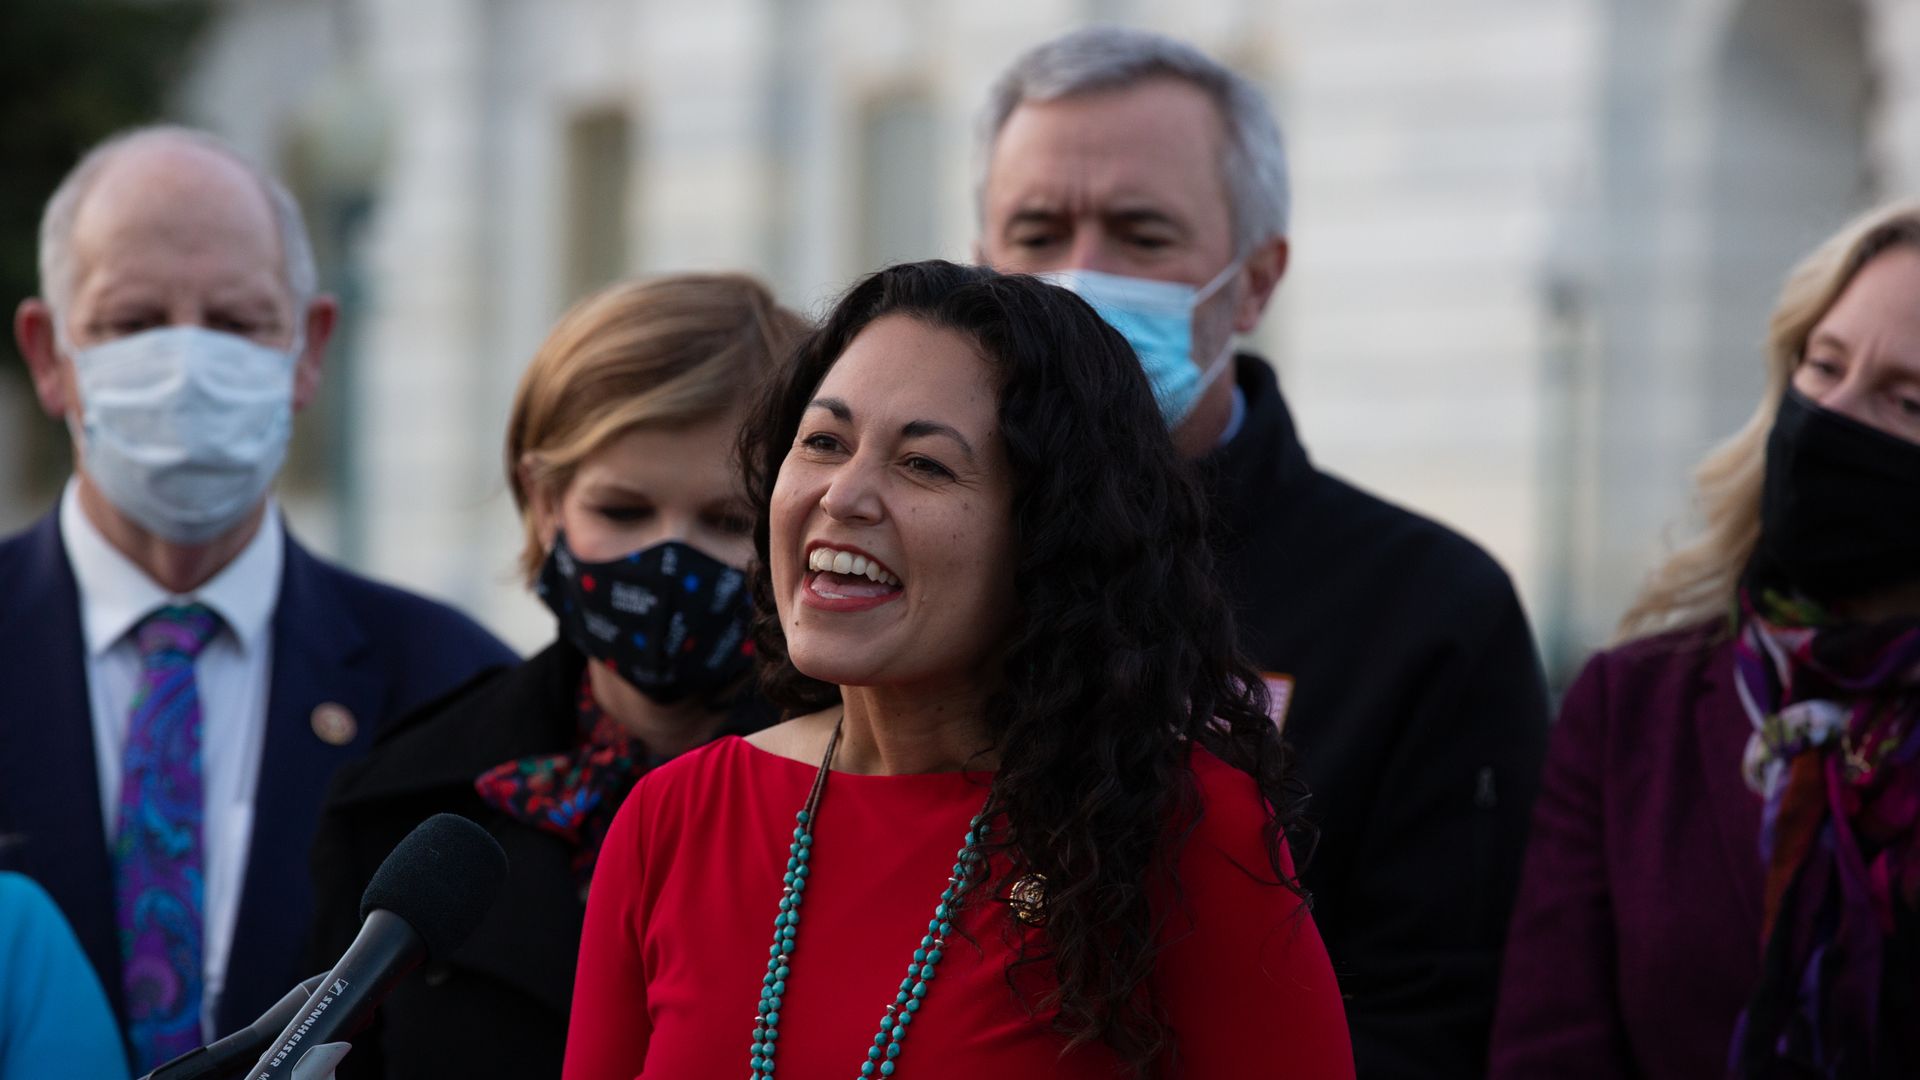 Then U.S.-Rep. Xochitl Torres Small (D-NM) speaks at a podium outside the US Capitol with members of the Problem Solvers Caucus.